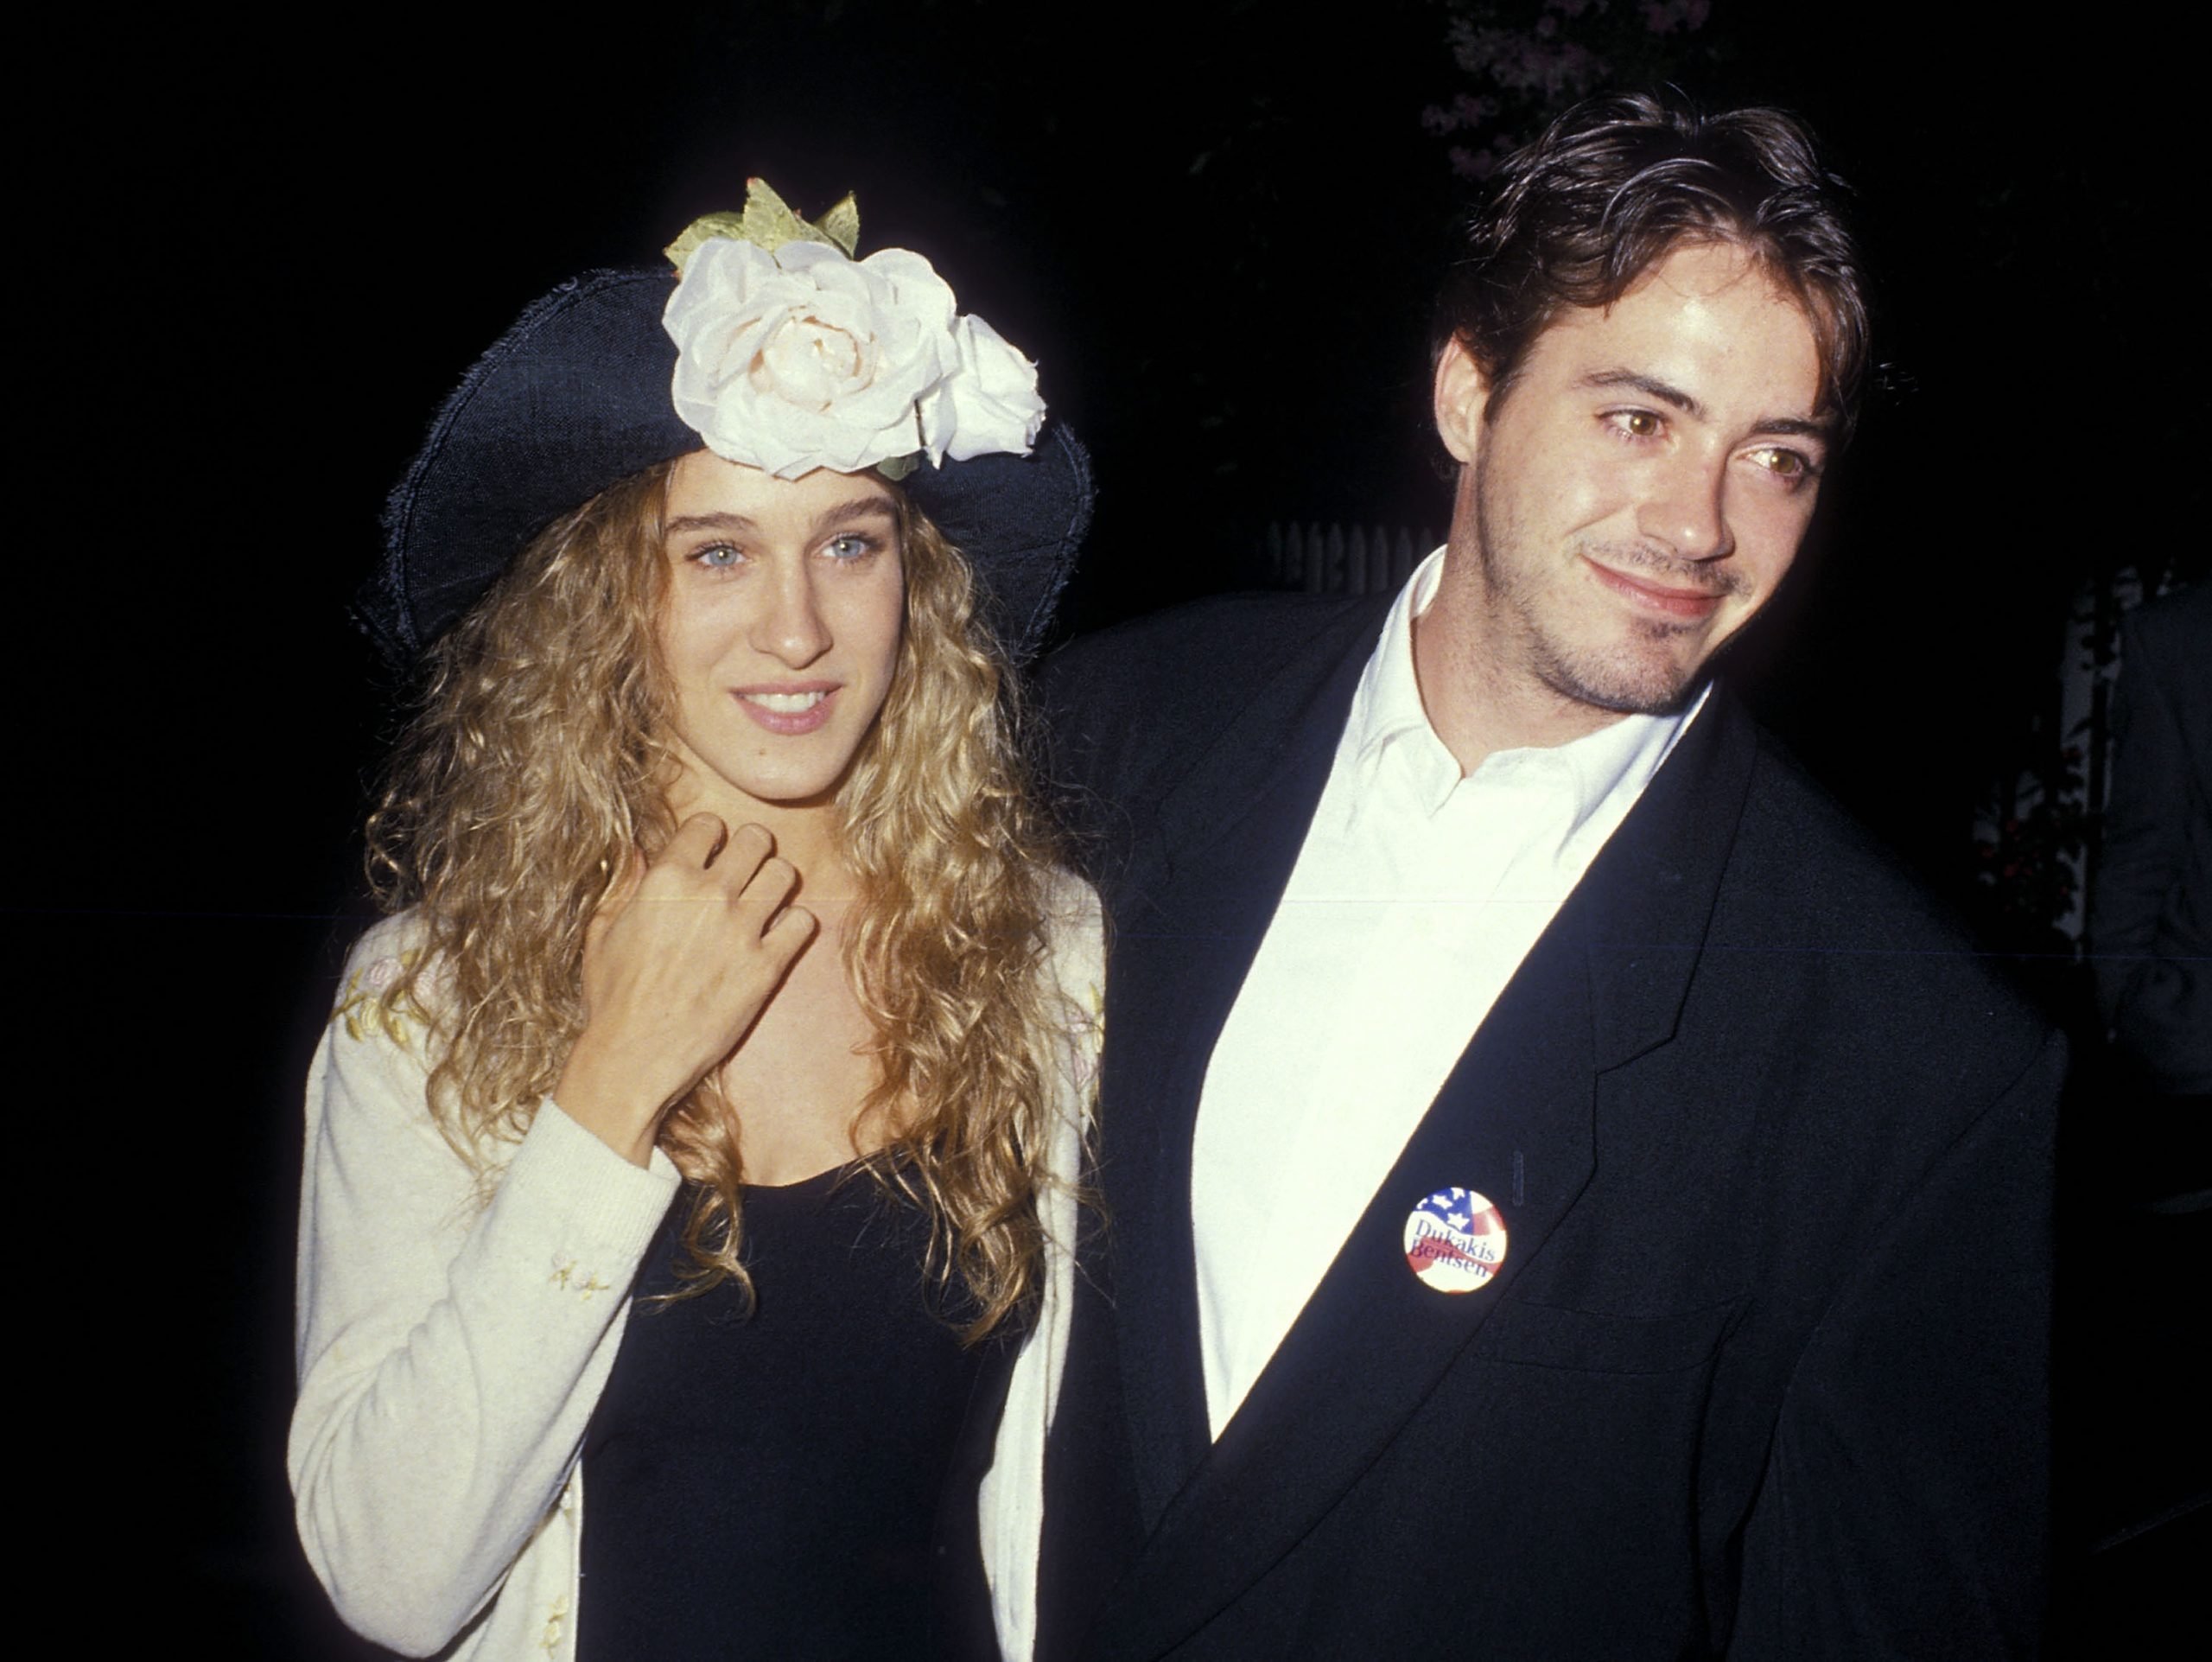 Sarah Jessica Parker Says Robert Downey Jr. Taught Her ‘How to Love’